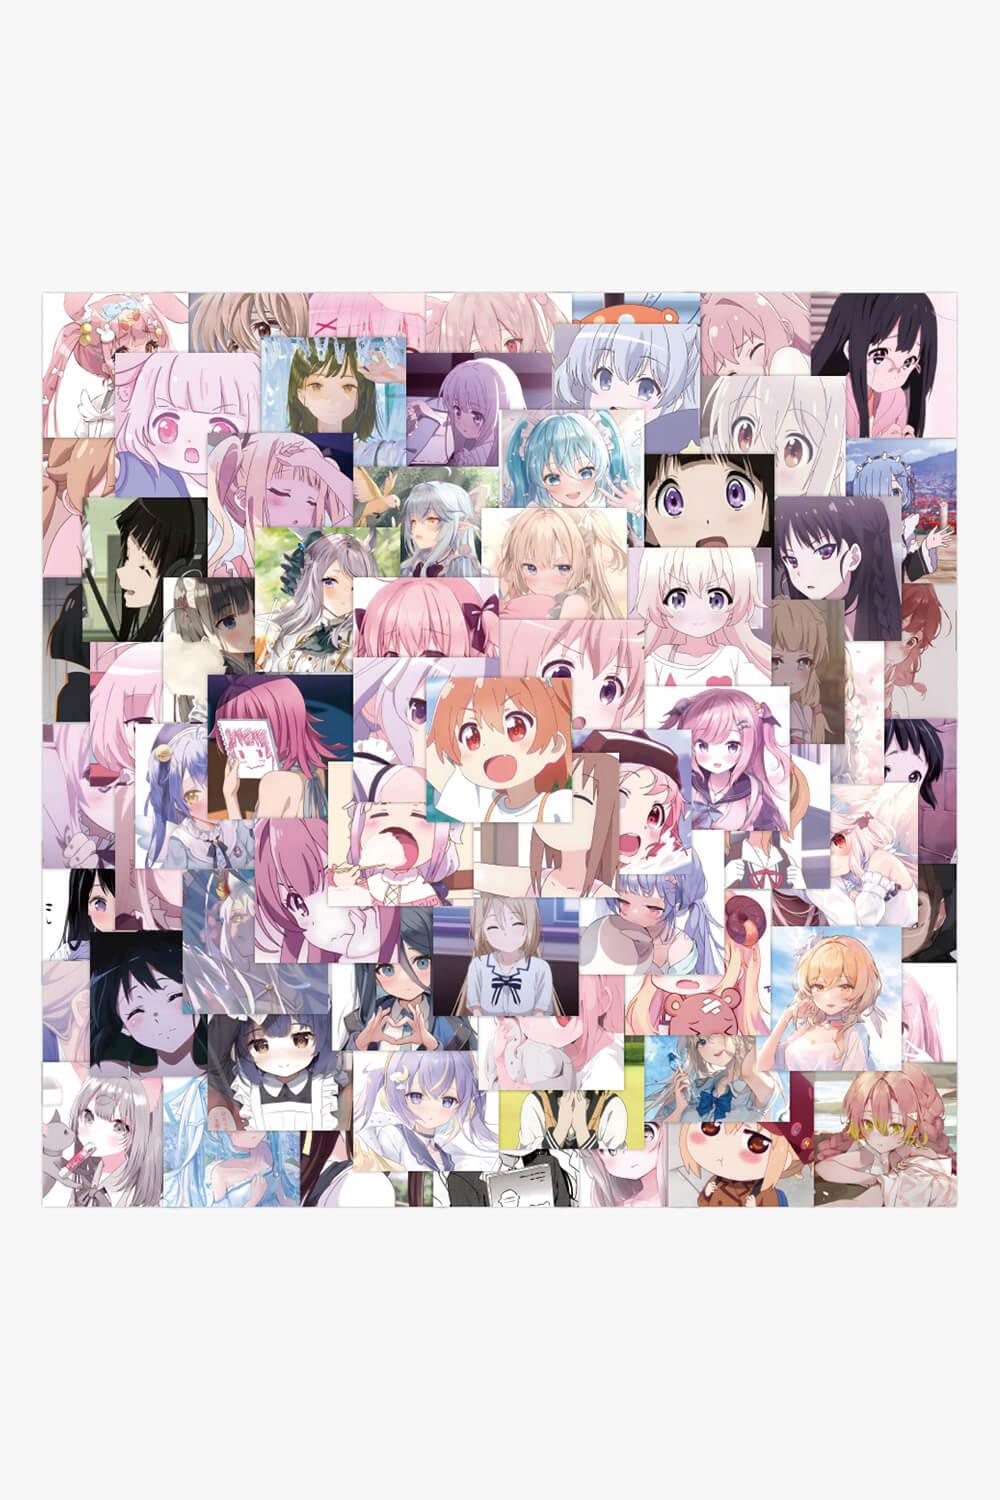 120 Kawaii Anime Girls Stickers - Aesthetic Clothes Shop